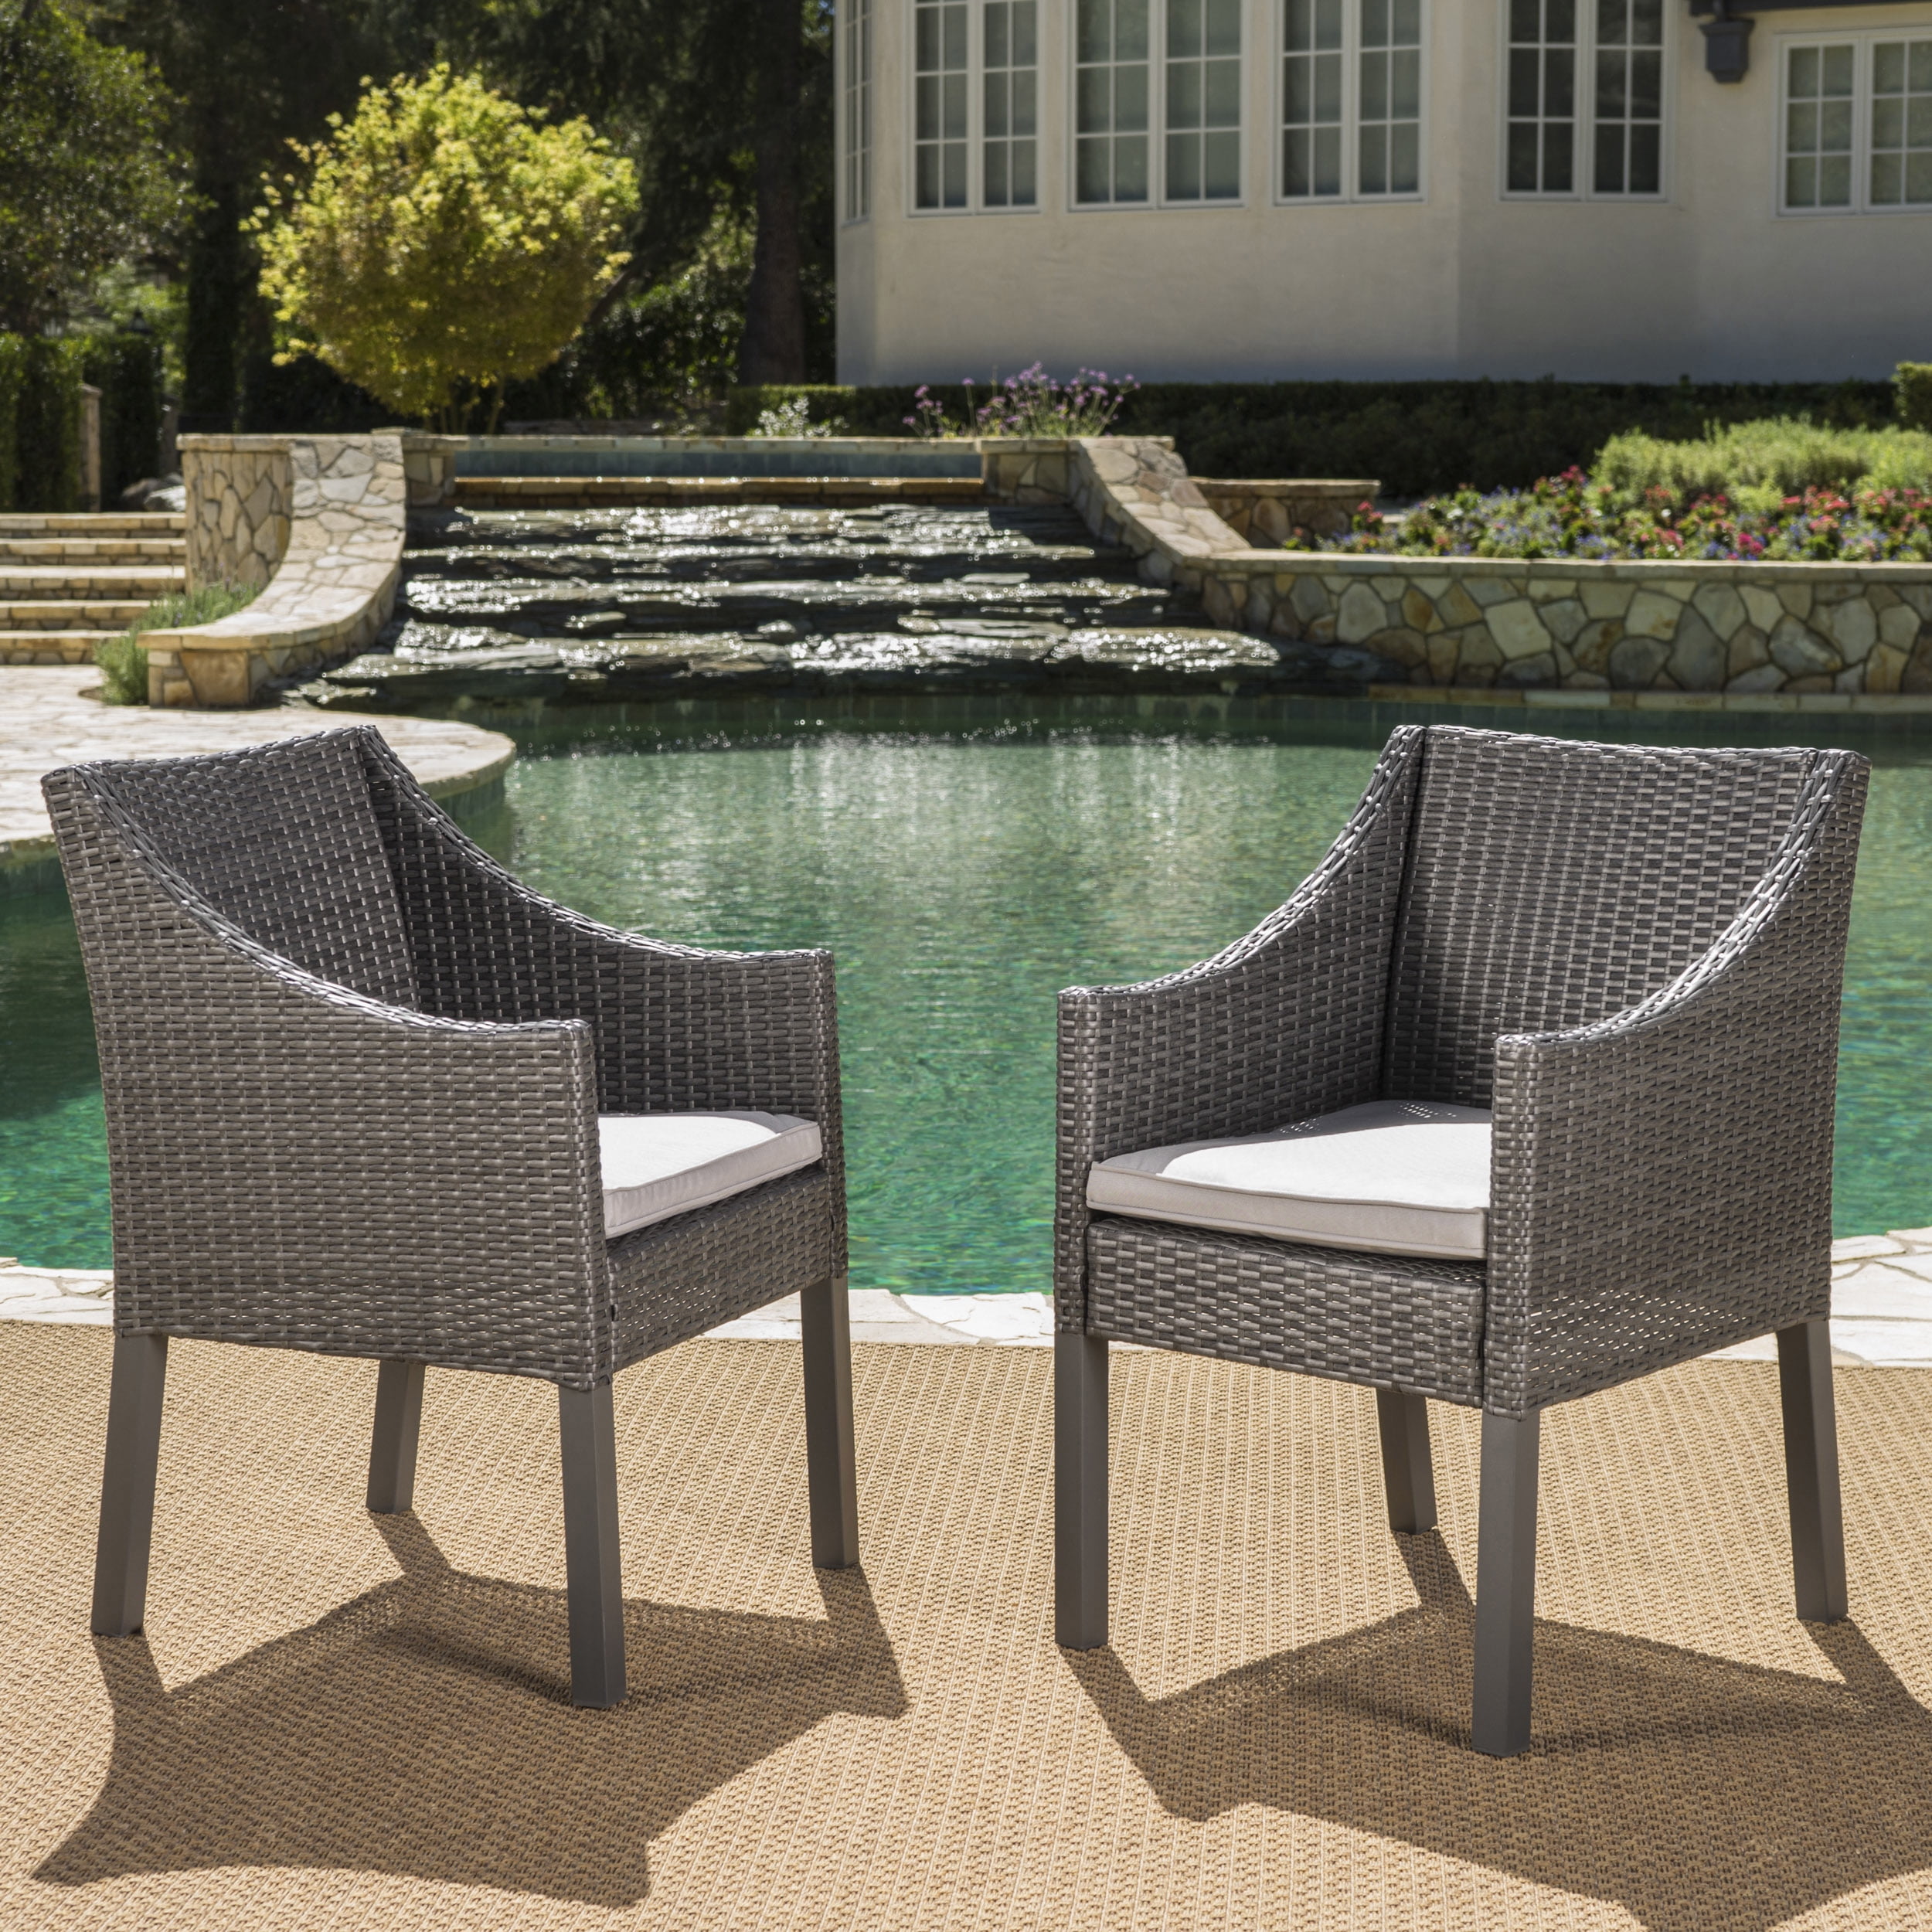 Estelle Outdoor Wicker Dining Chairs with Cushions, Set of 2, Grey